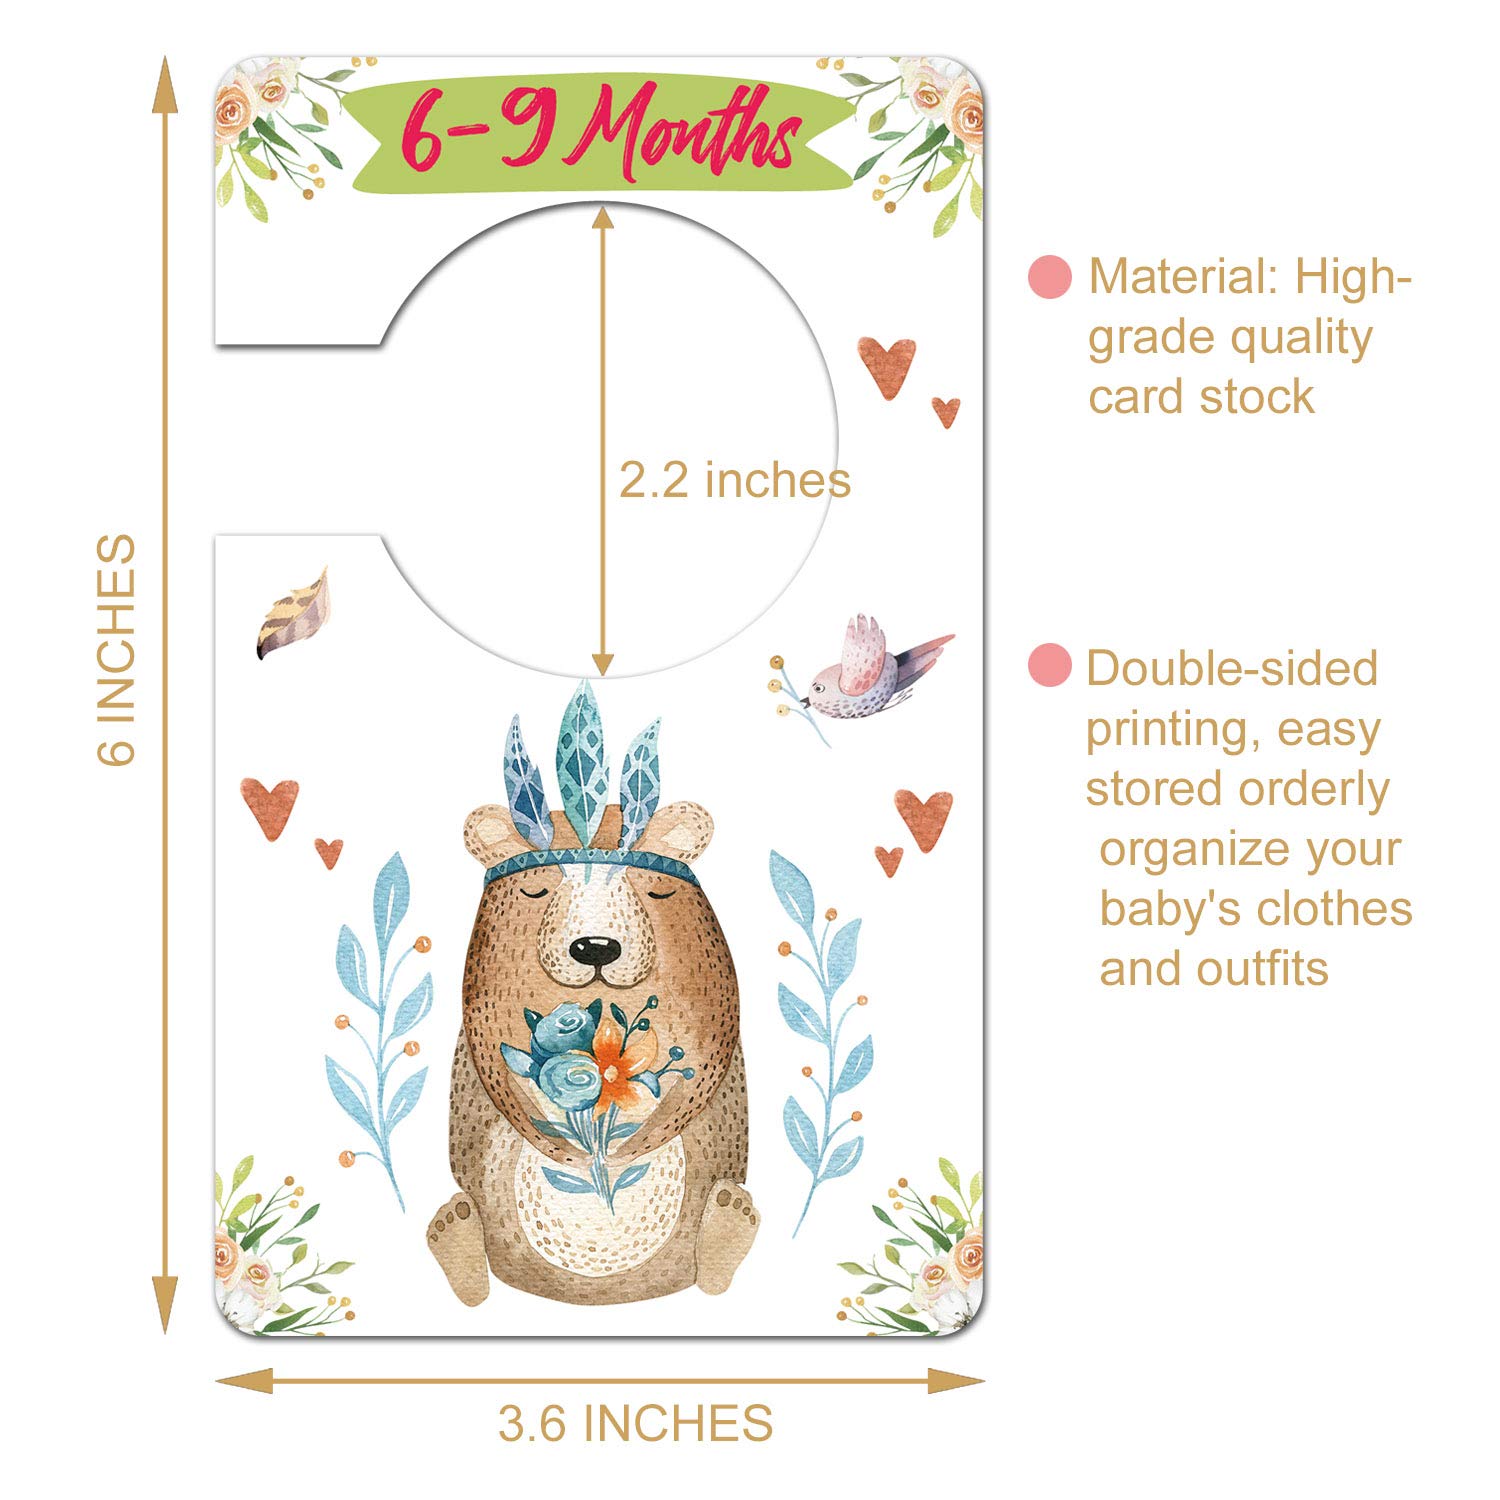 Baby Closet Size Dividers, Woodland Animal Clothes Organizer, Baby Closet Dividers from Newborn Infant to 24 Months, Baby Shower Set for Boys and Girls, 7 Pack.